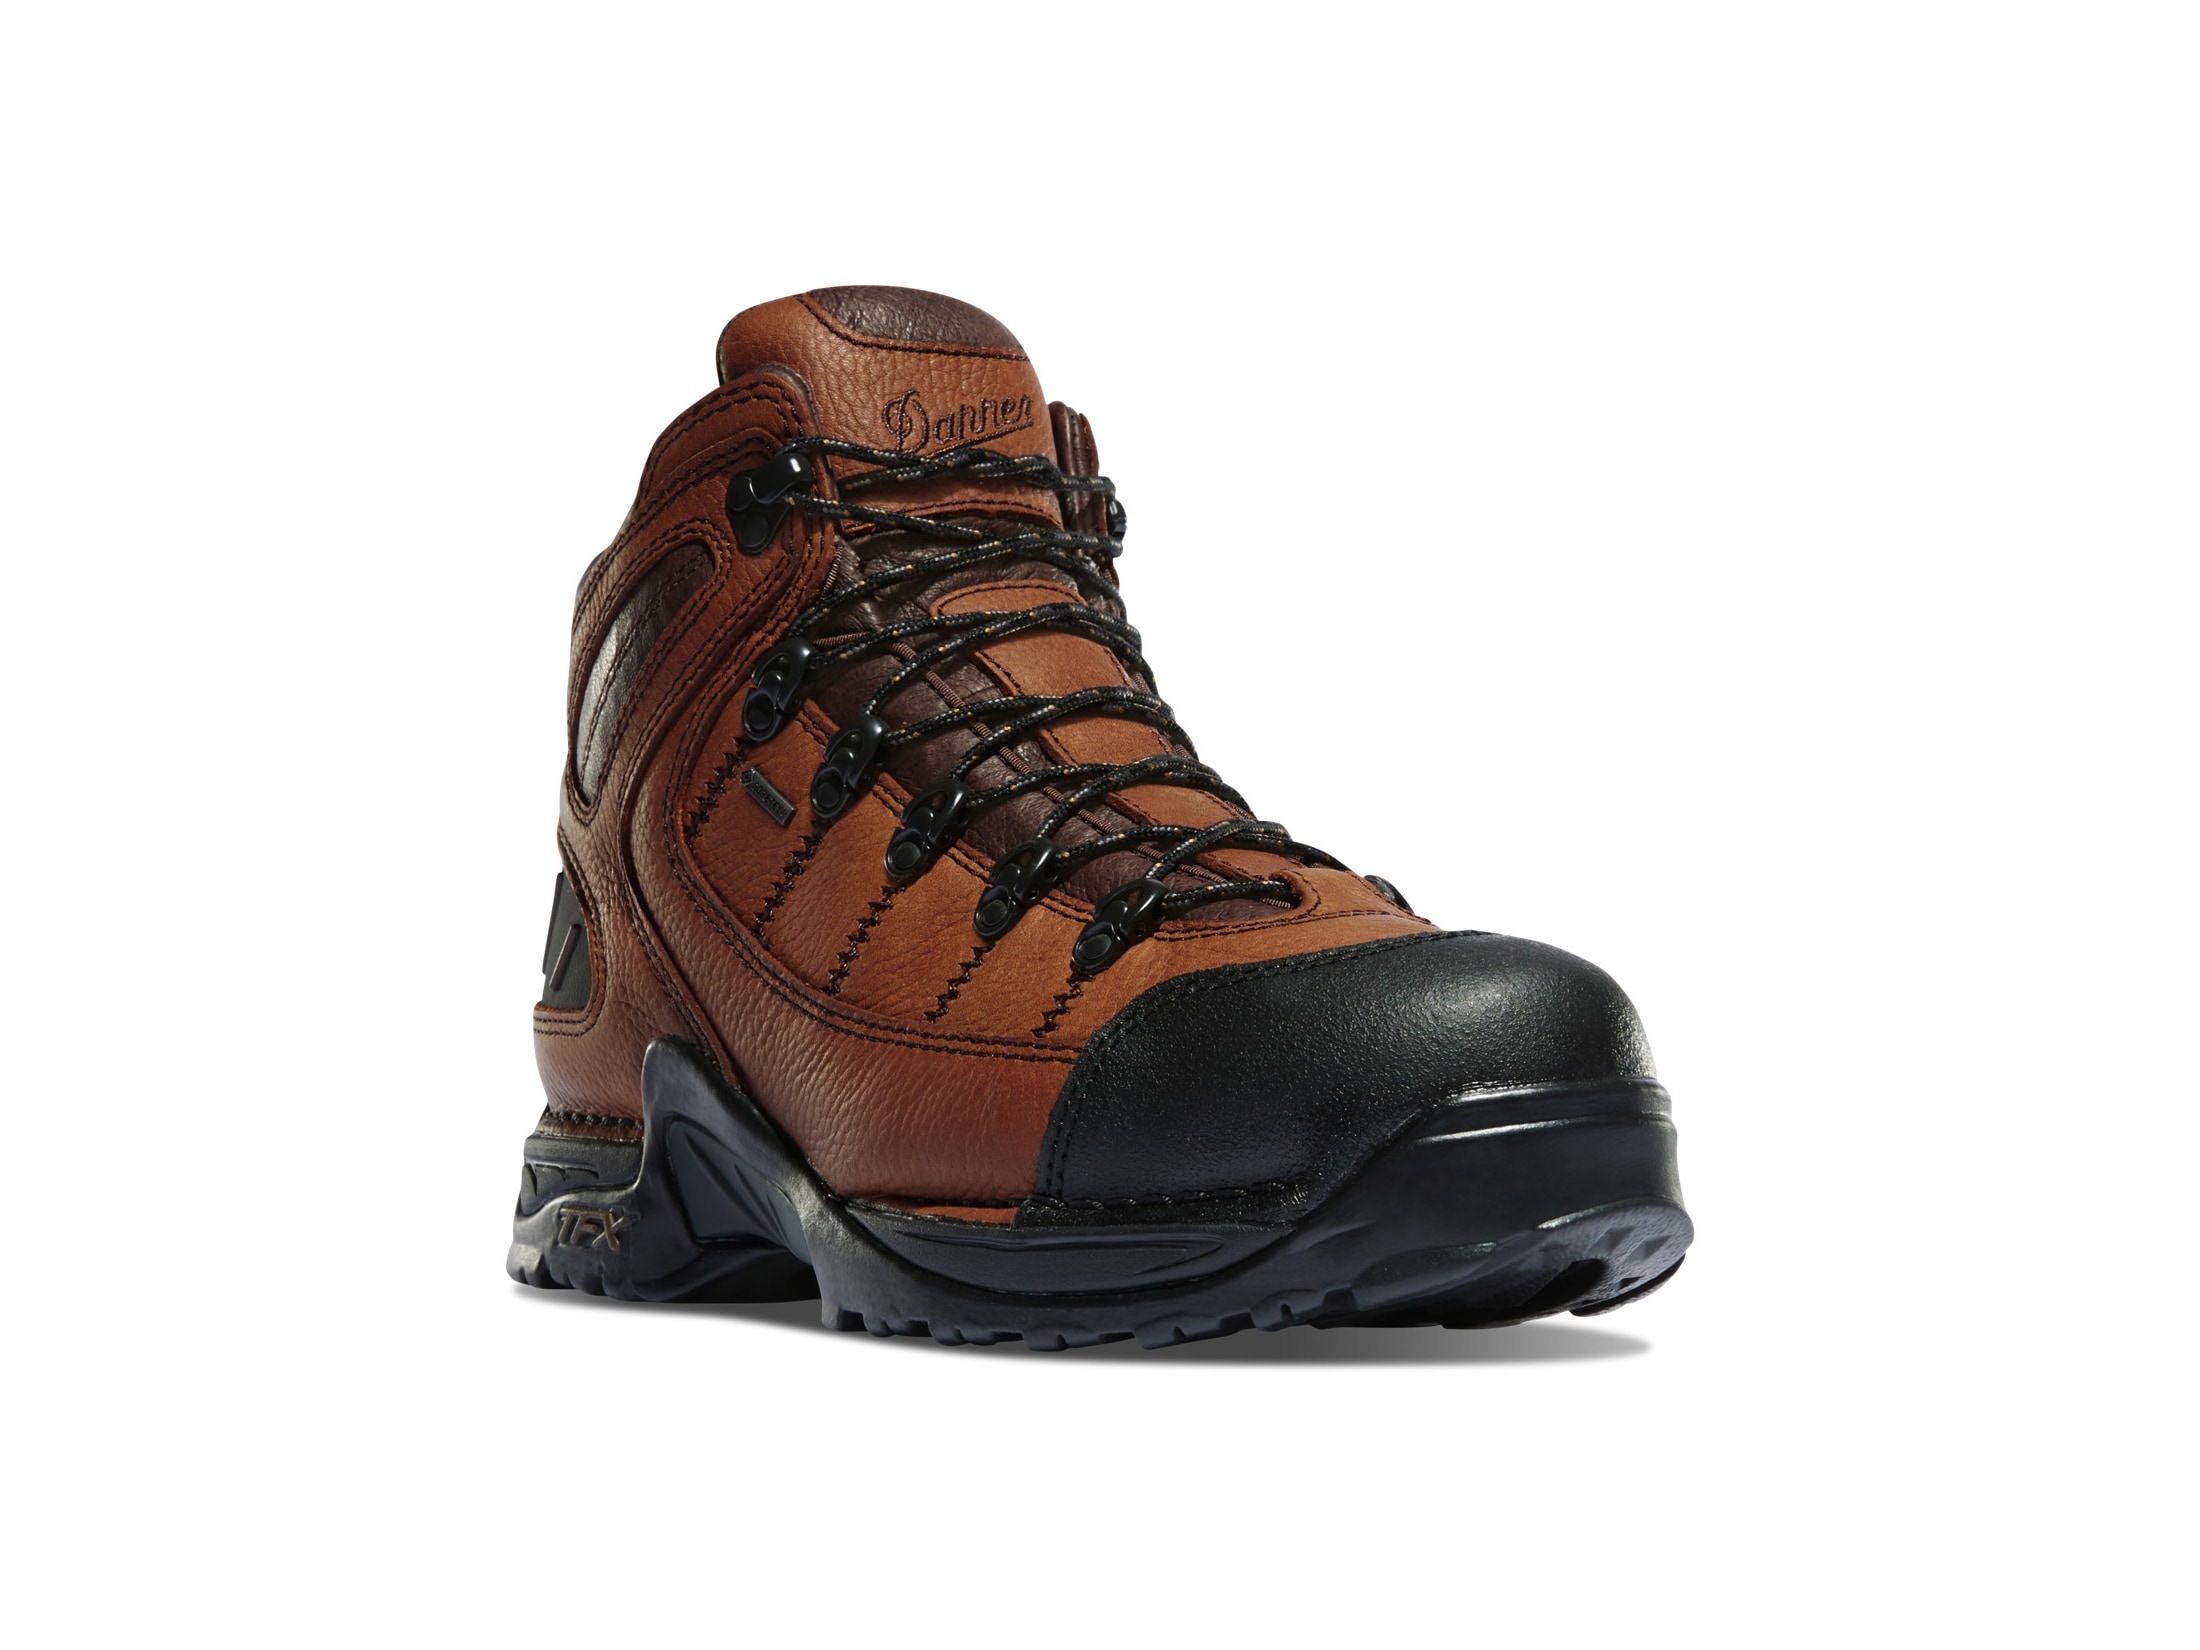 Danner 453 5.5 GORE-TEX Hiking Boots 